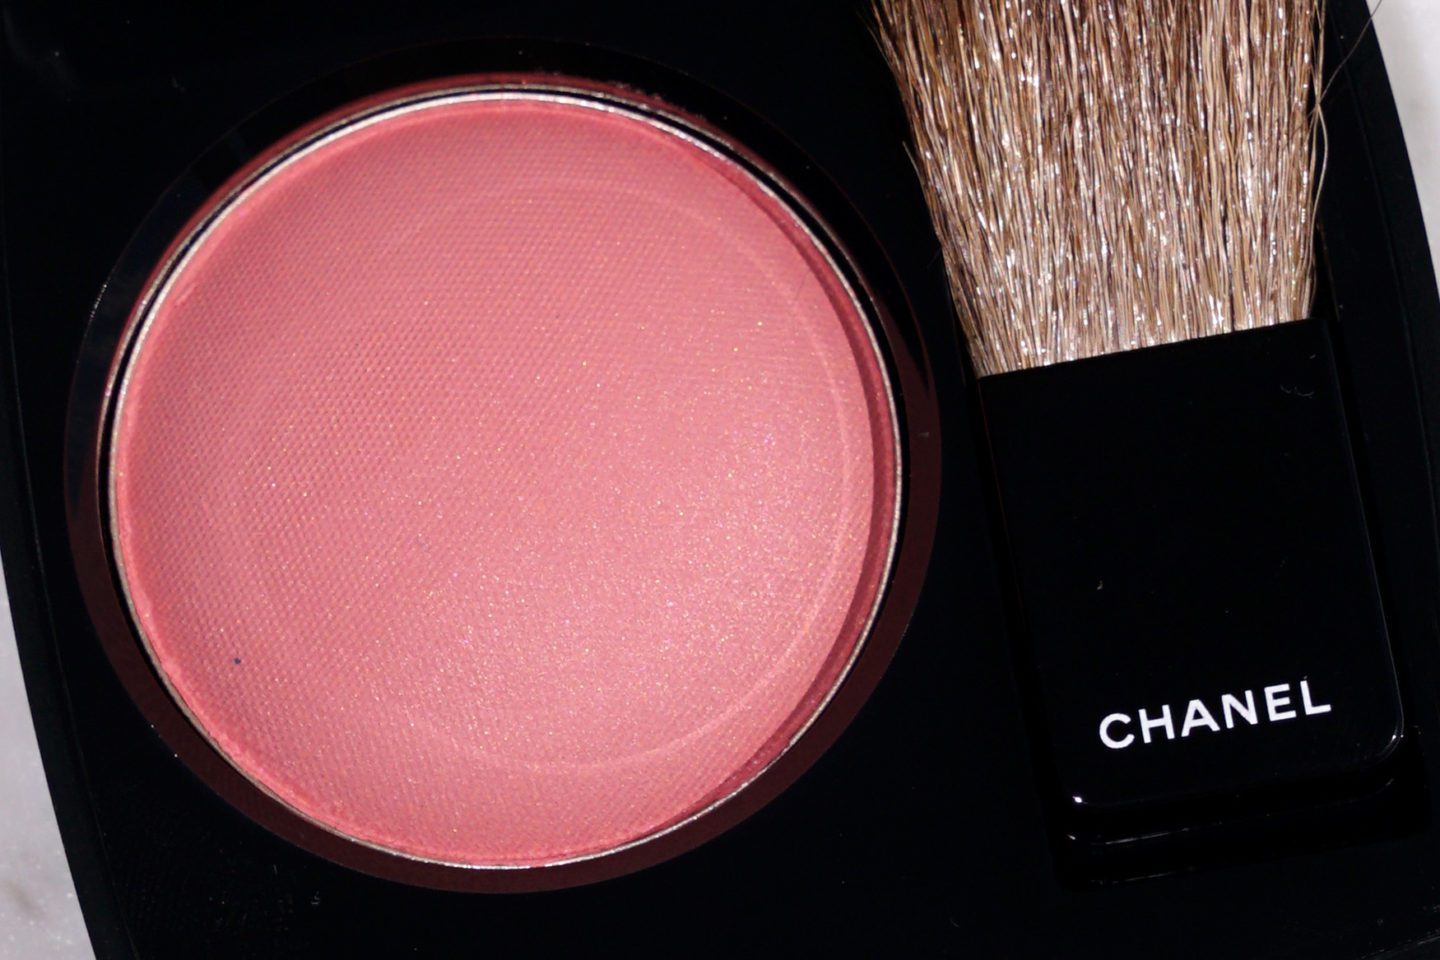 Chanel Powder Blush Quintessence Review + swatches | The Beauty Look Book